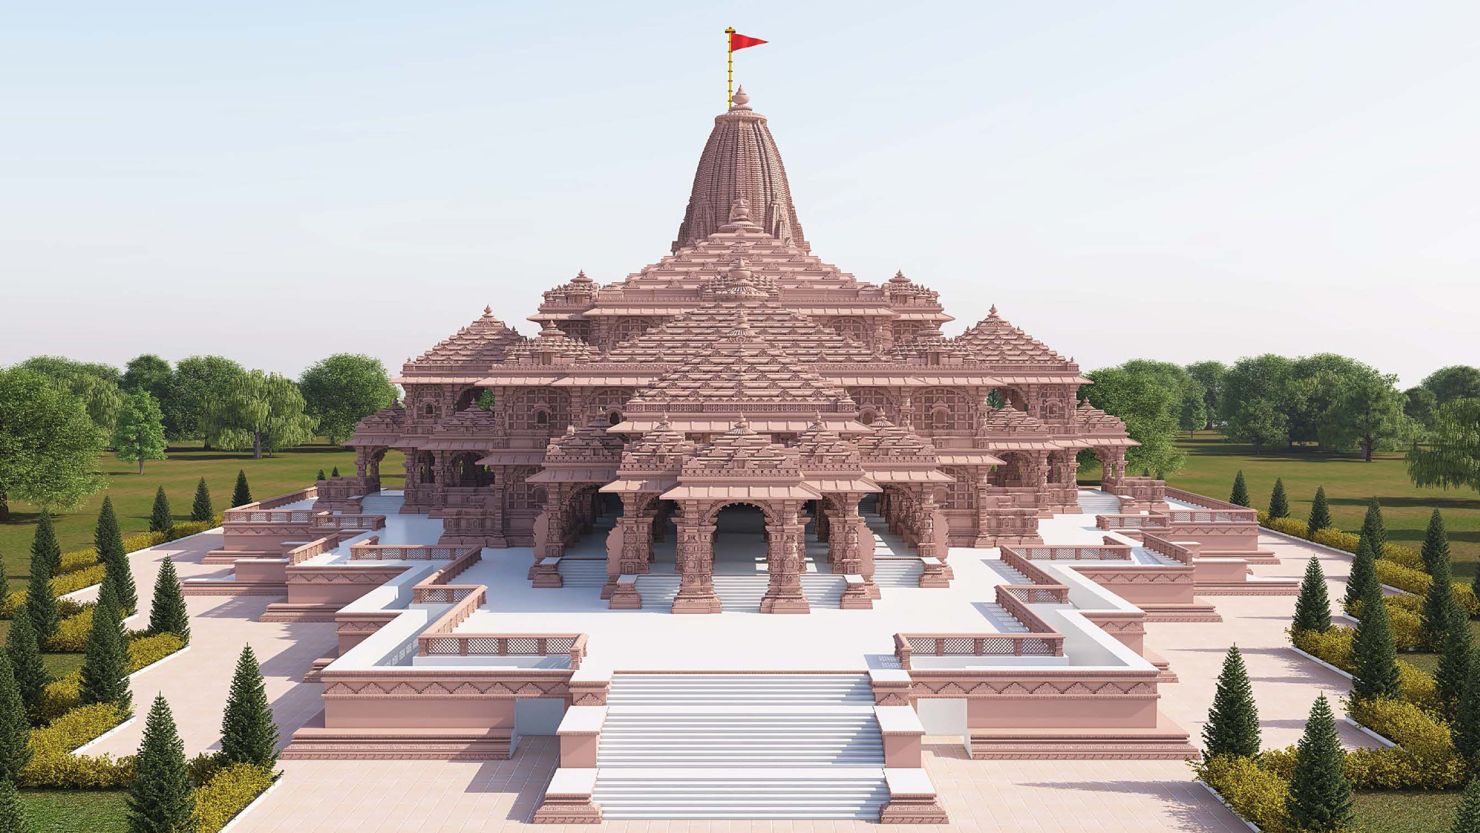 The first detailed descriptions of the Ram Janmabhoomi Mandir were released on Thursday.